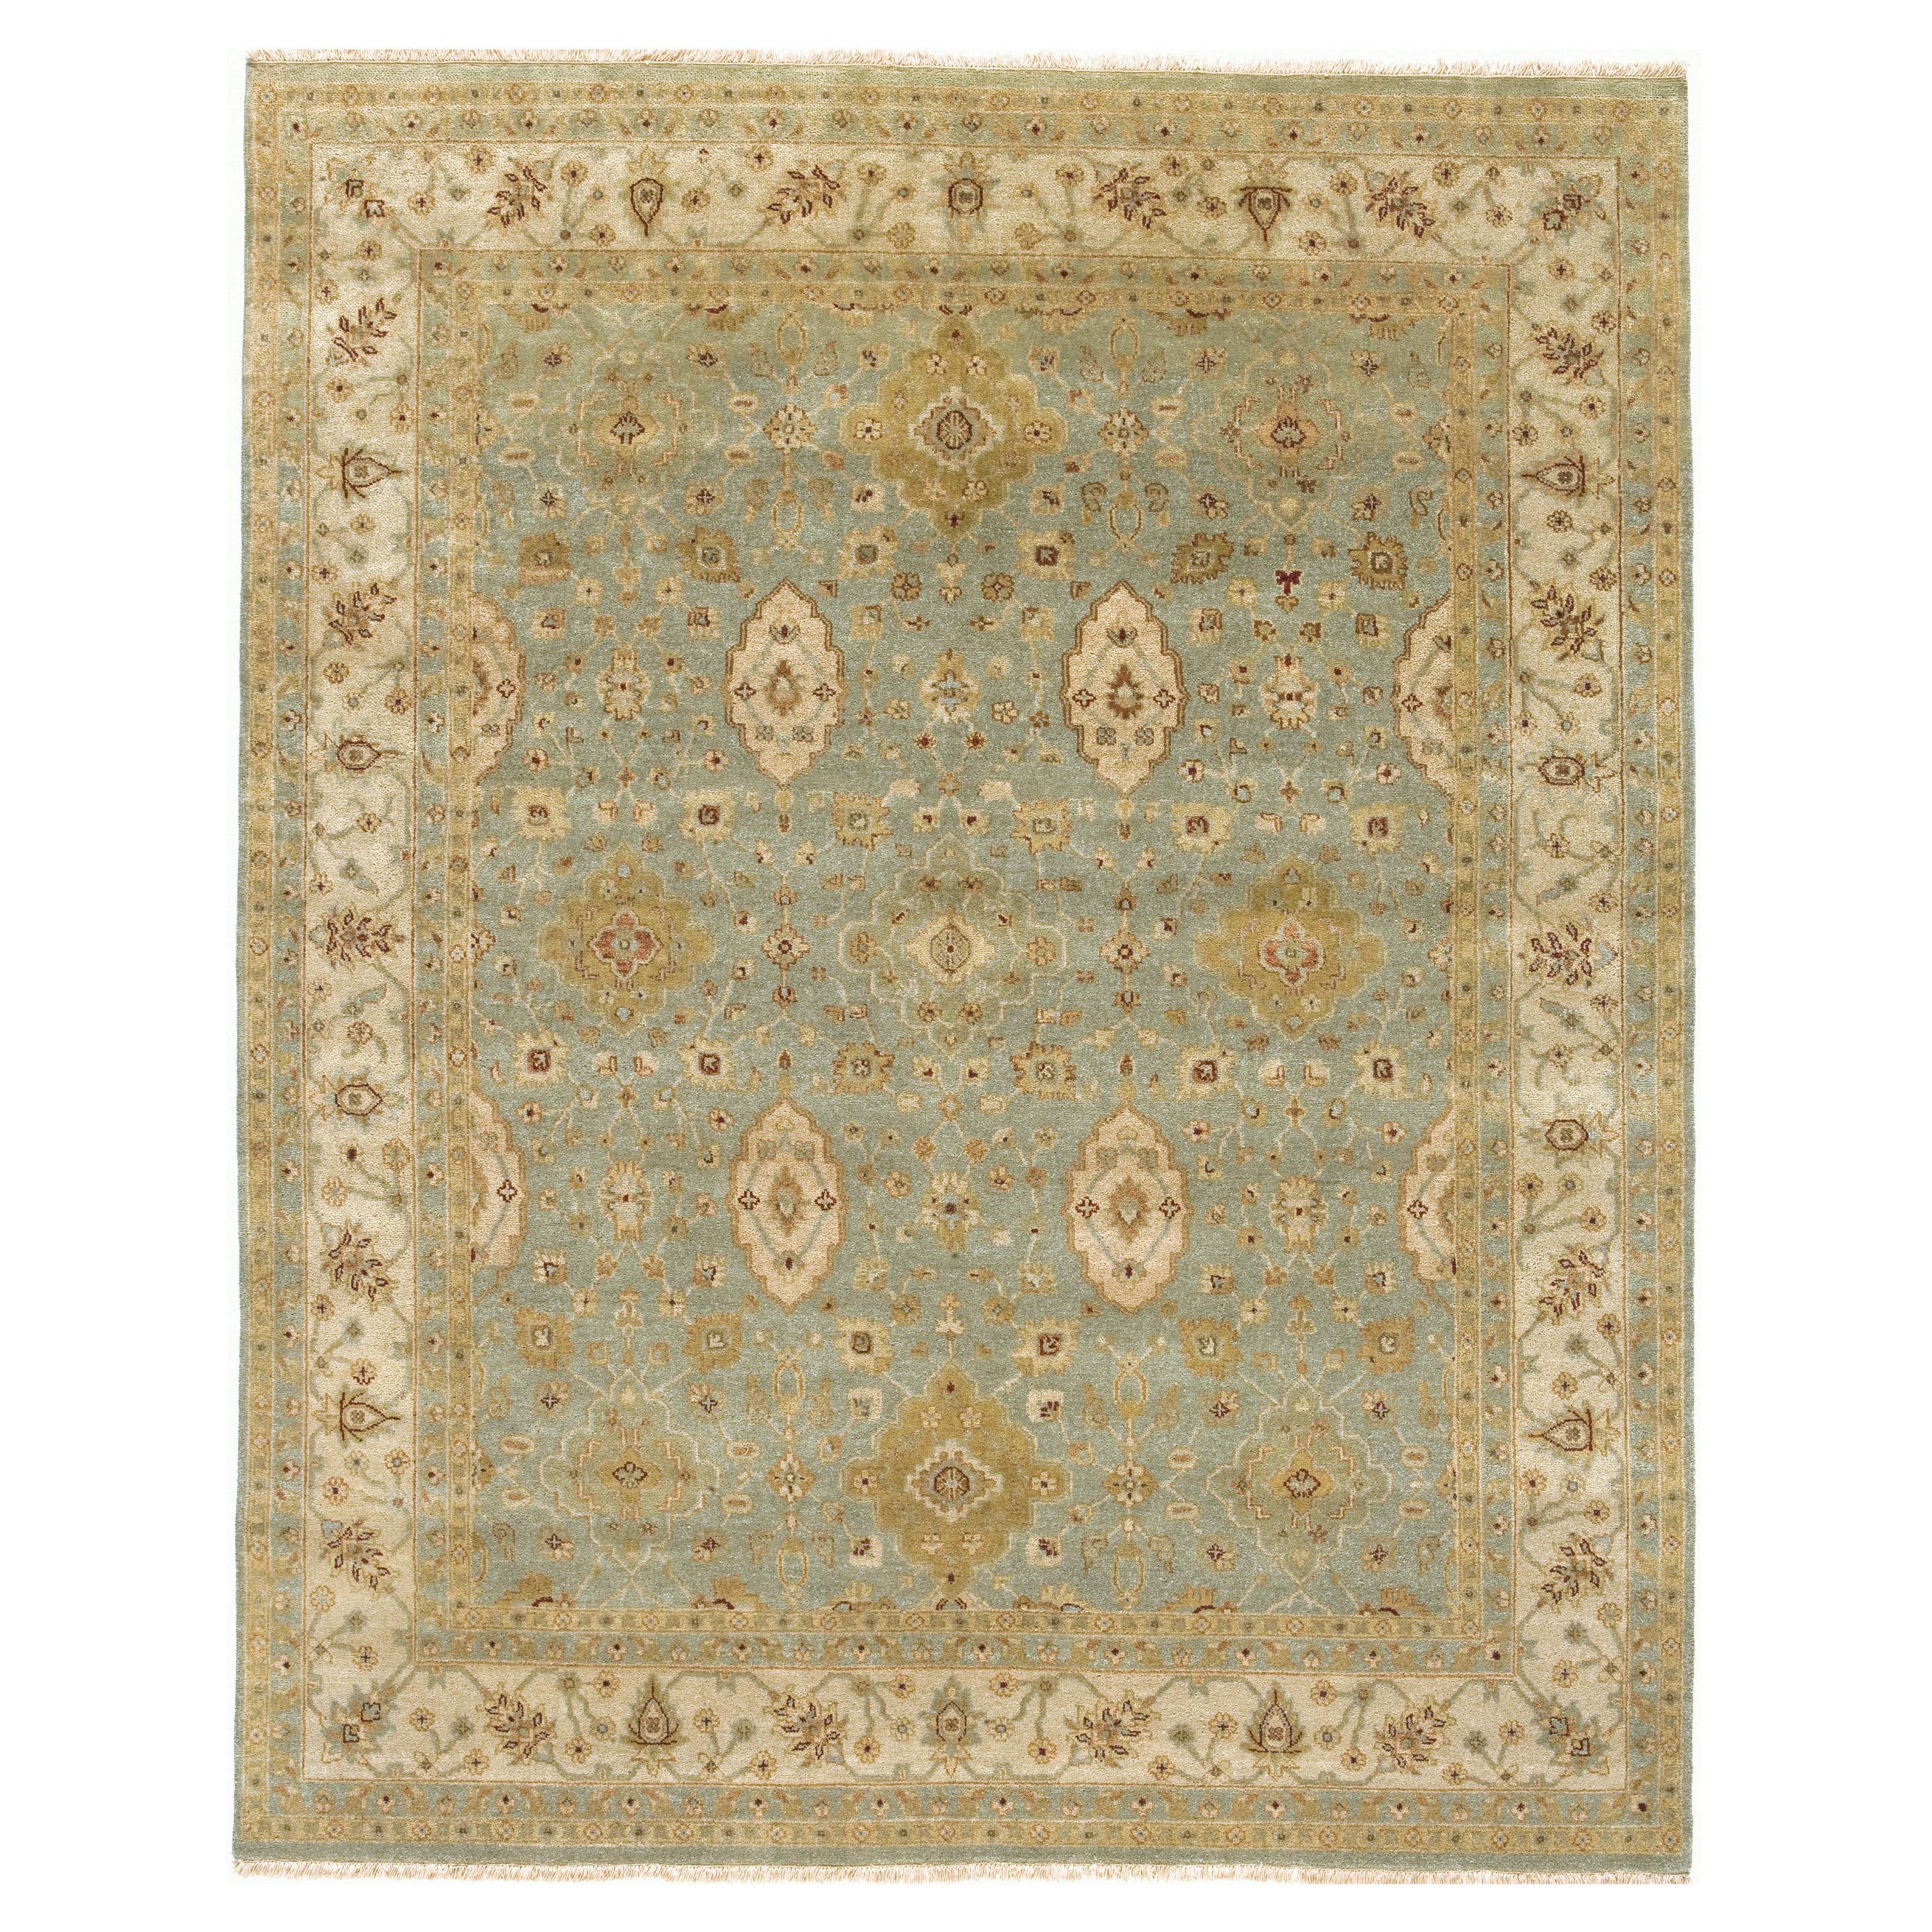 Luxury Traditional Hand-Knotted Vase Aqua & Beige 12x15 Rug